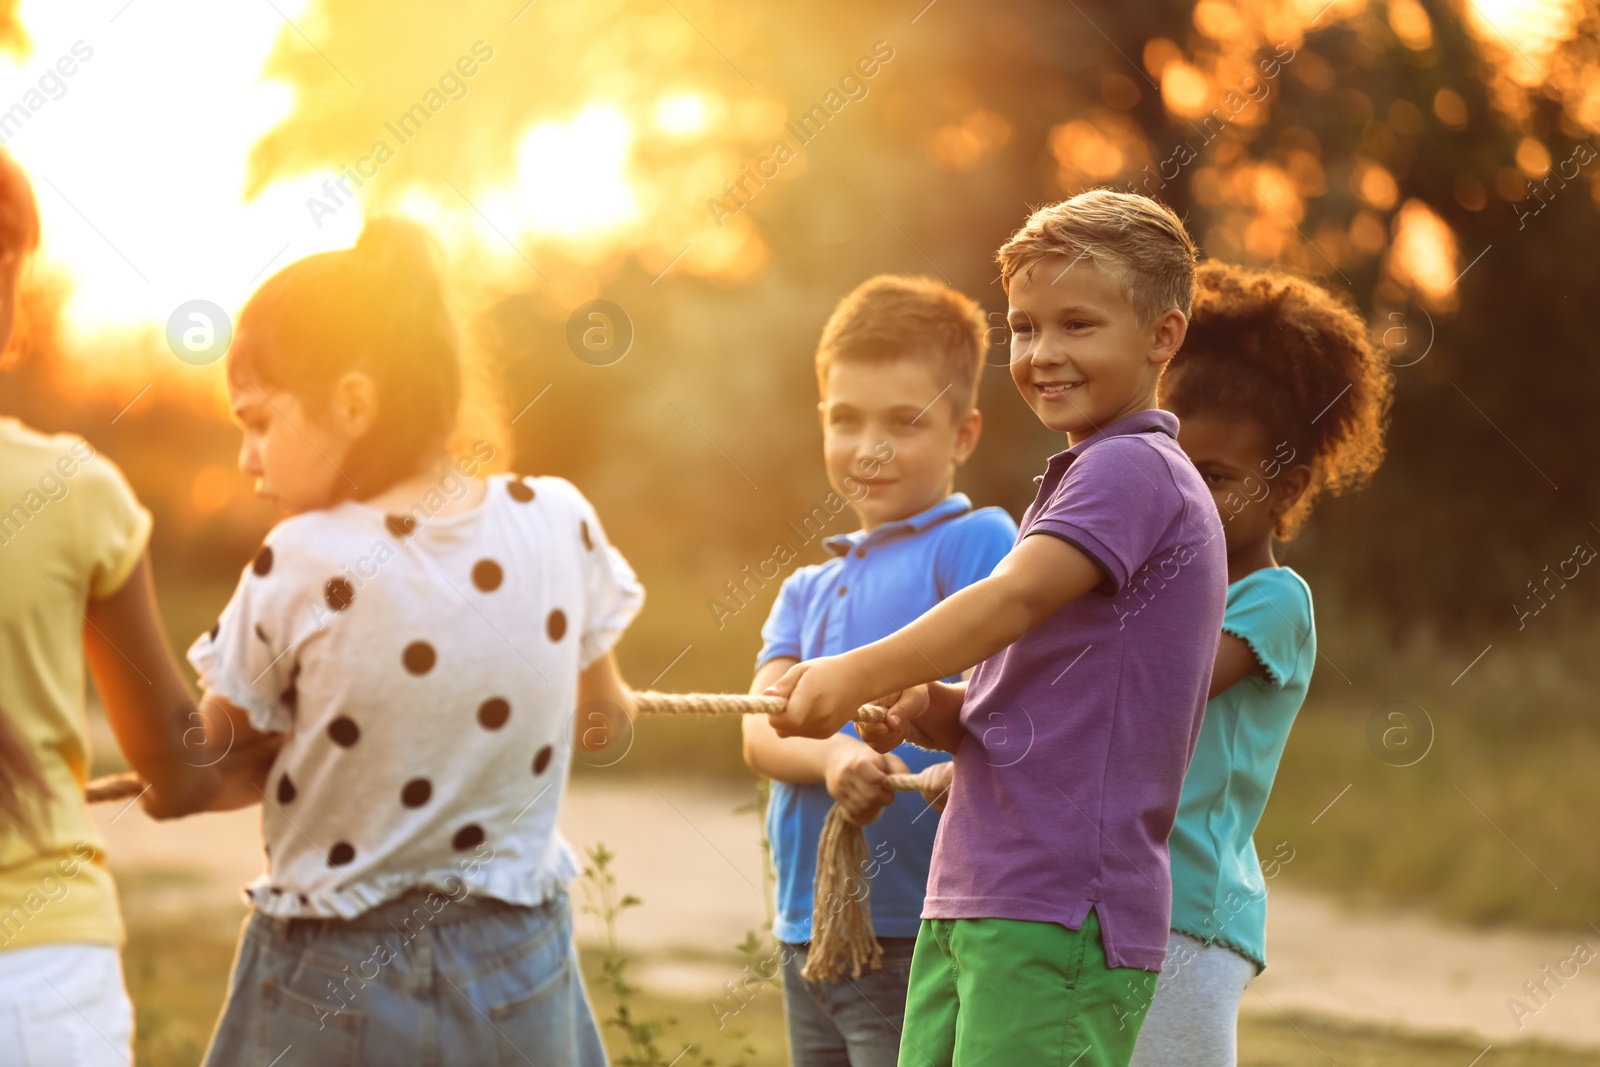 Image of Cute little children playing tug of war game in park at sunset